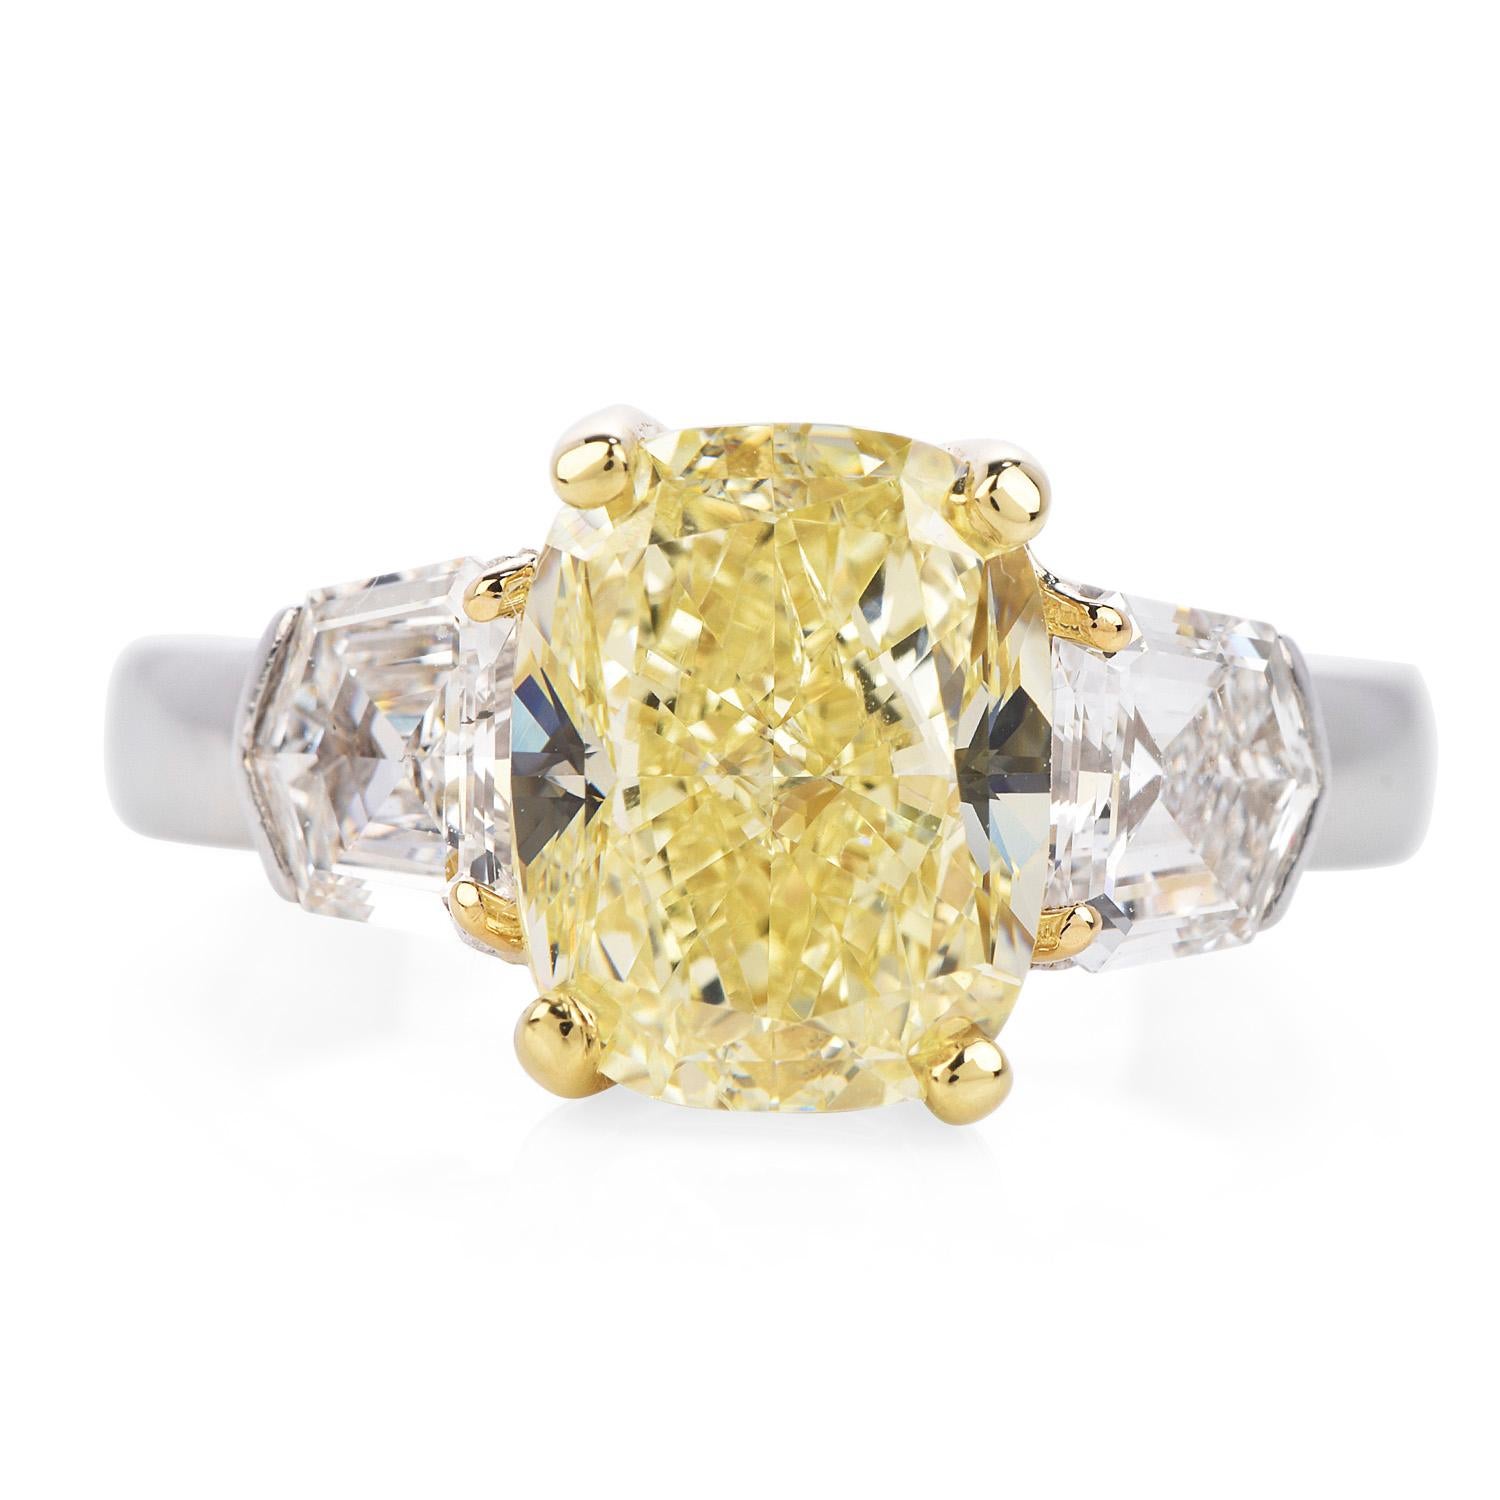 Classic Three Stone Style GIA Certified Fancy Light Yellow Diamond Engagement Ring Dazzles us with its natural sparkle.

Exquisitely crafted in solid platinum, with an approximate total weight of 7.90 grams,

featuring1 GIA natural genuine diamond